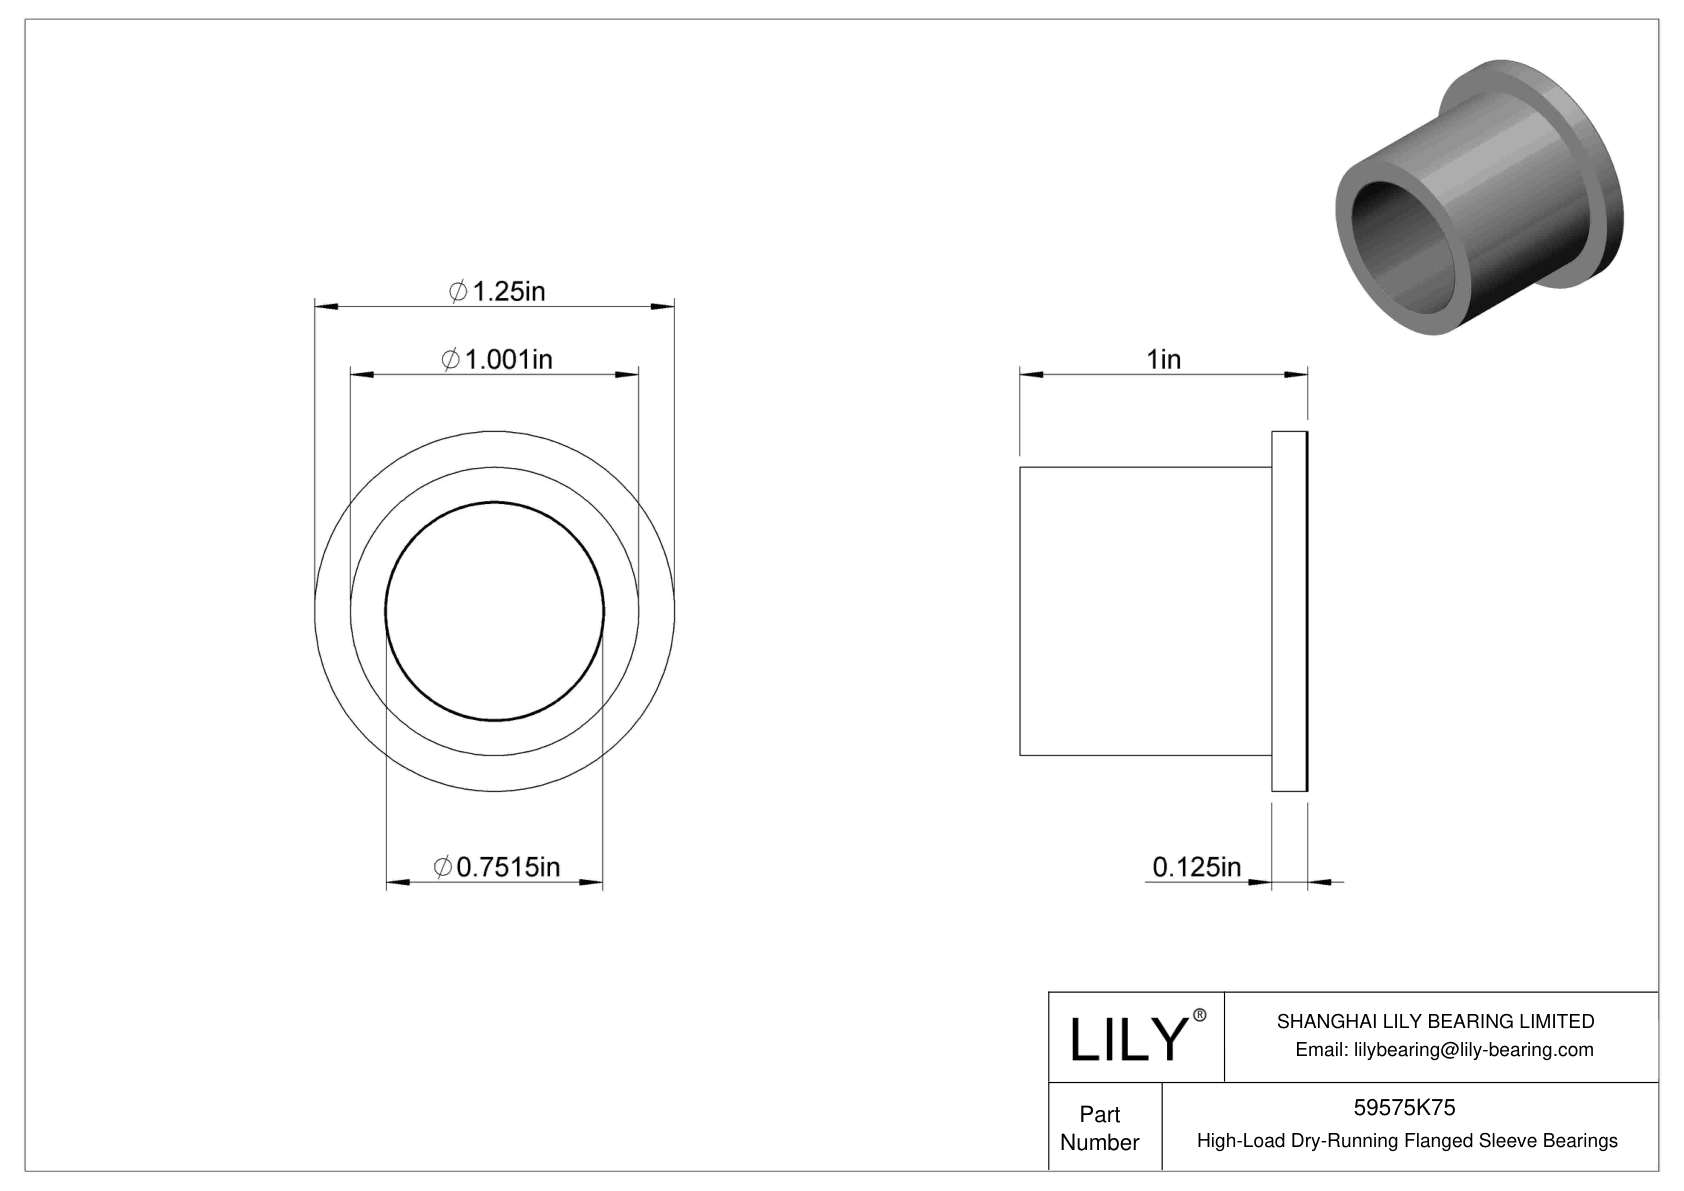 FJFHFKHF High-Load Dry-Running Flanged Sleeve Bearings cad drawing